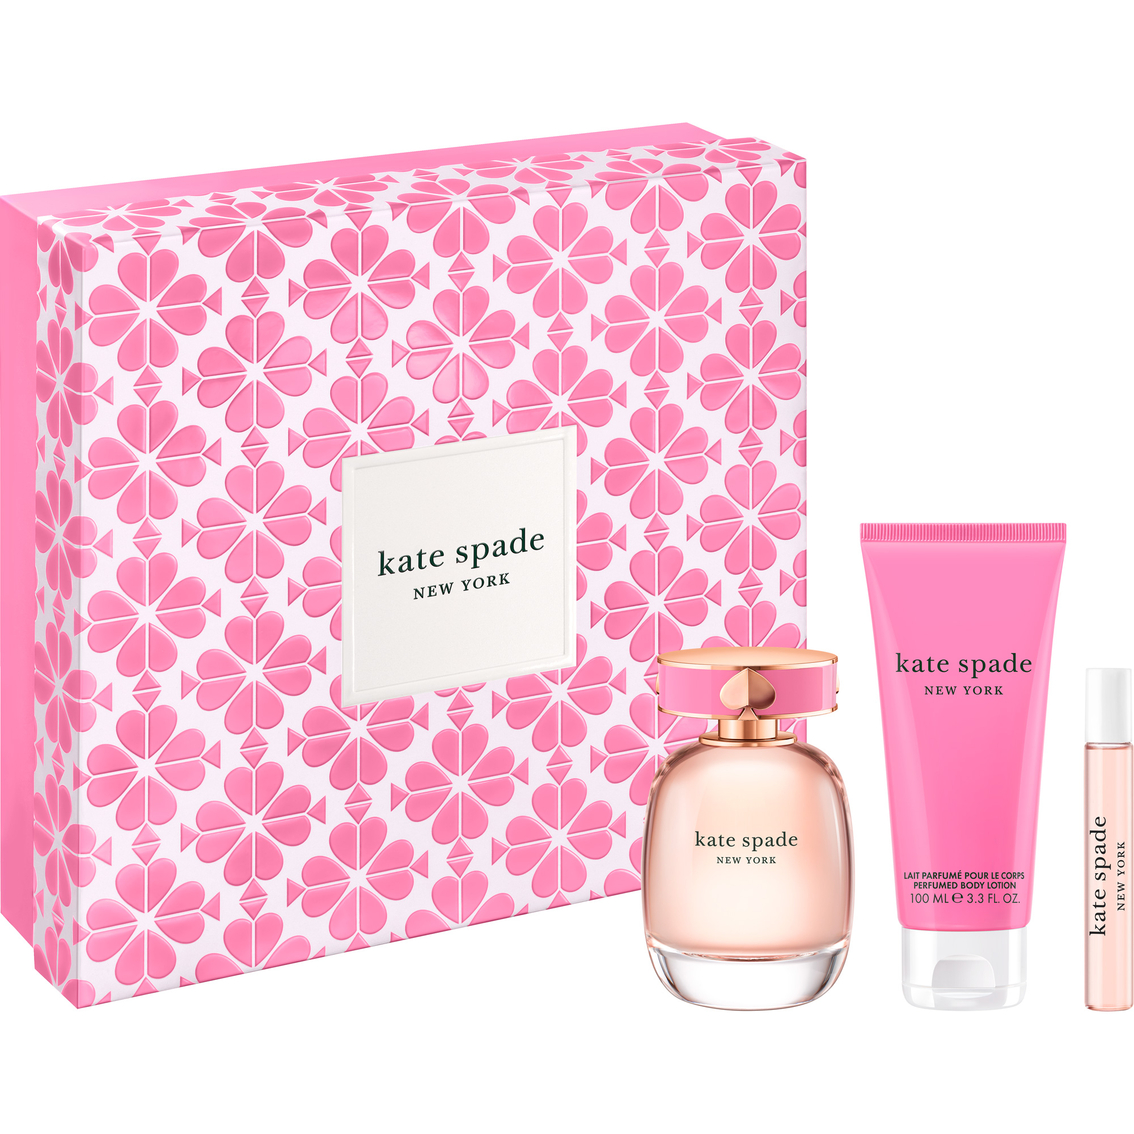 Kate Spade New York Fragrance 3 Pc. Set | Gifts Sets For Her | Beauty